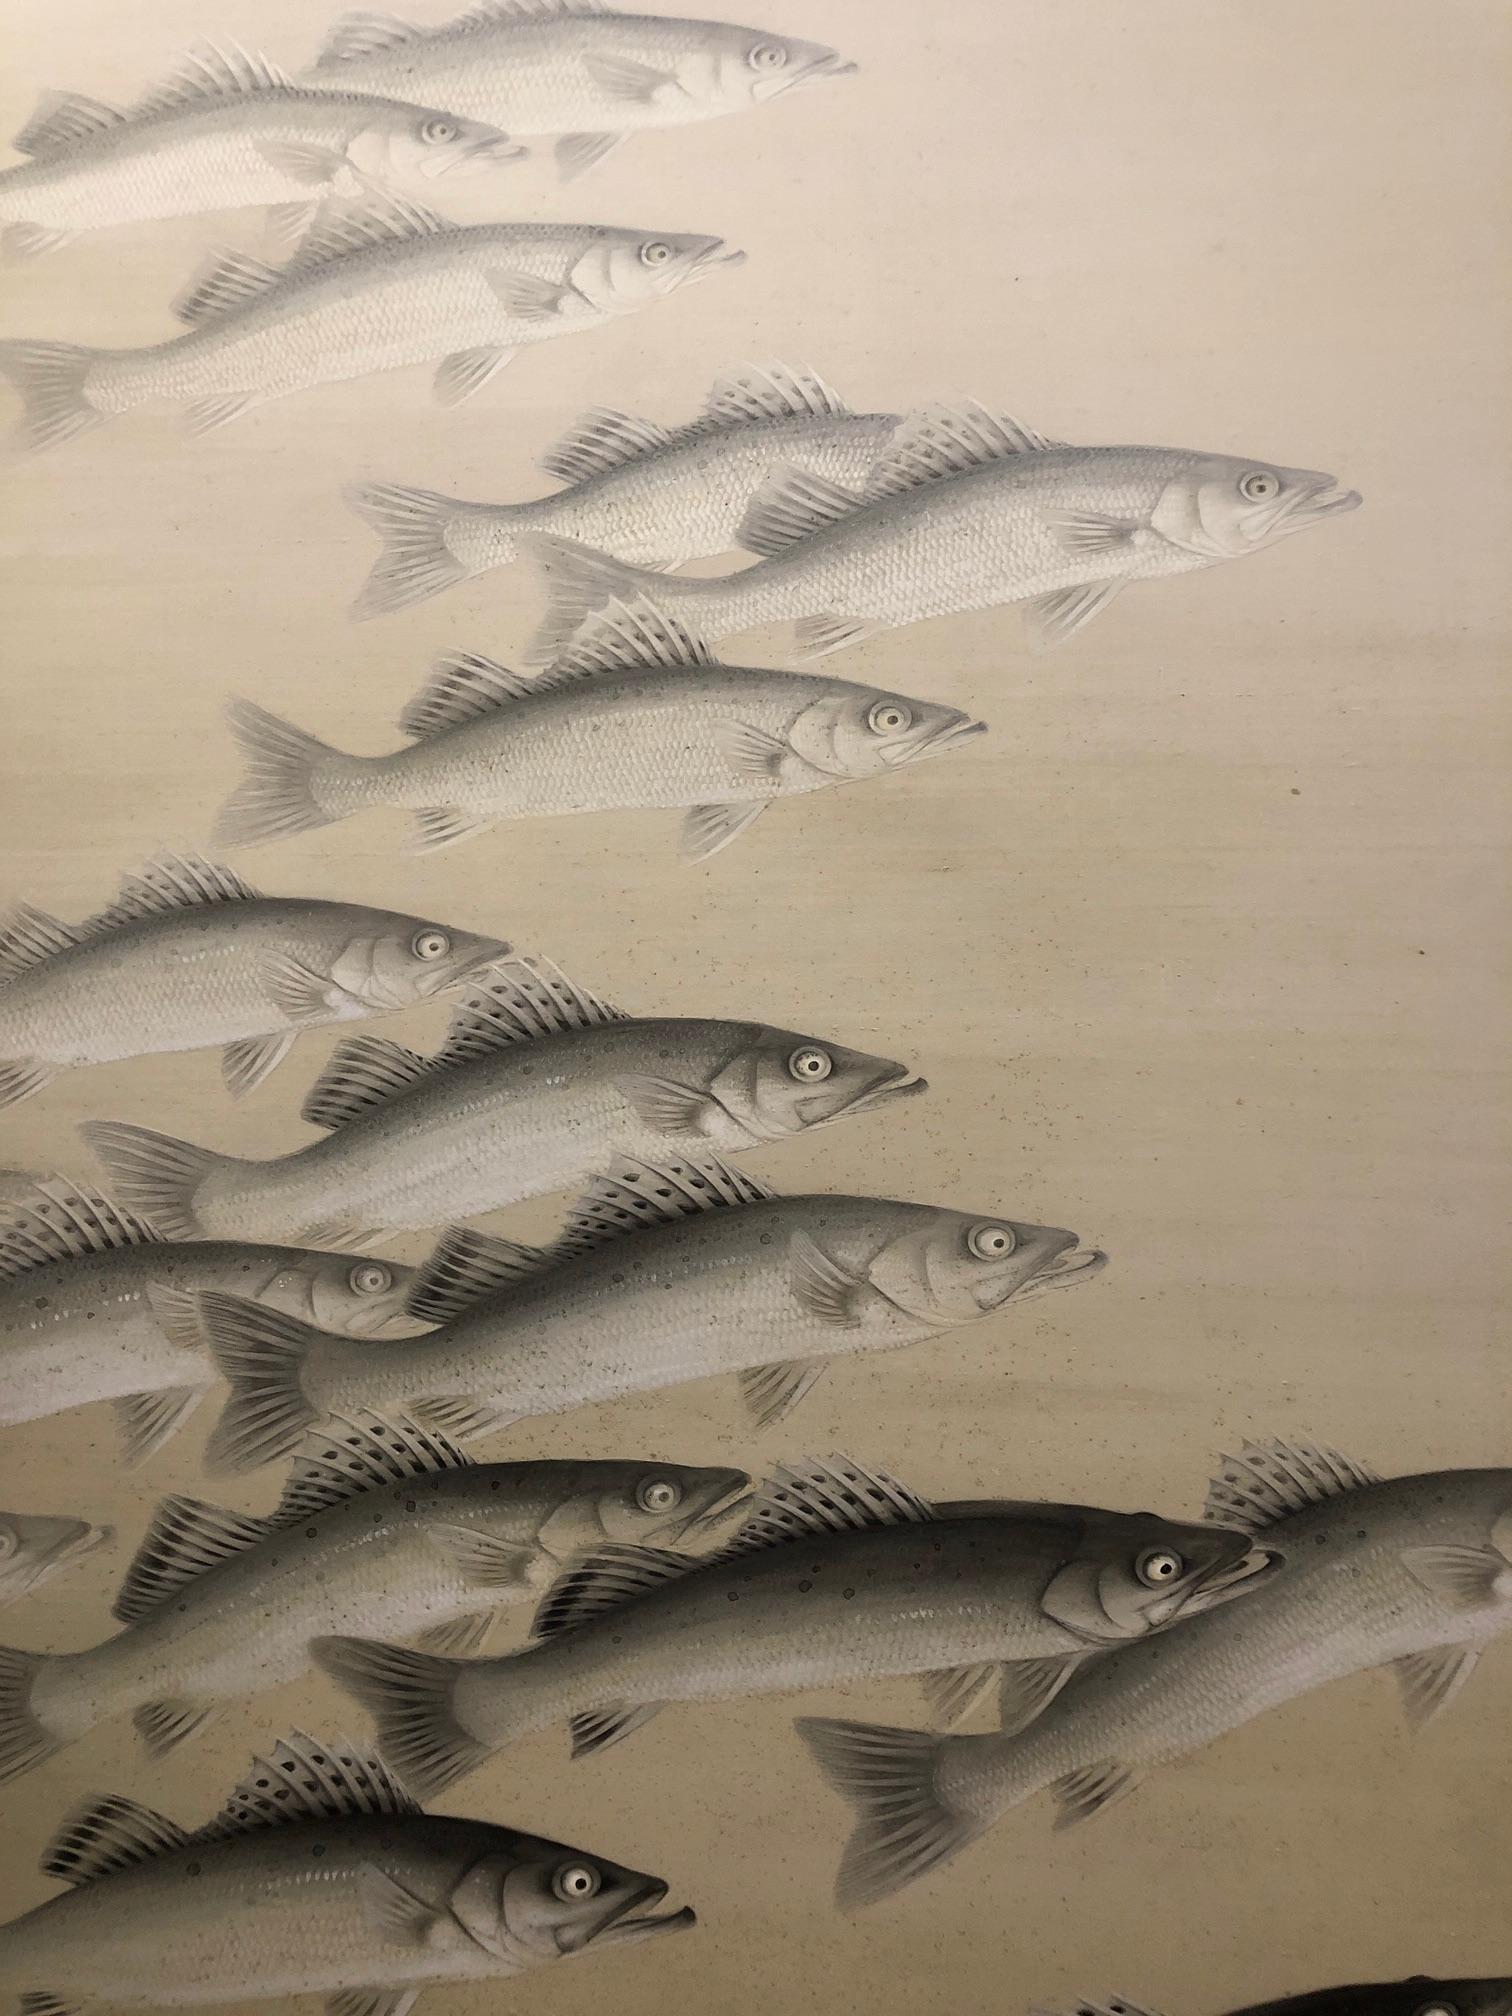 Japanese Two-Panel Screen School of River Fish 2